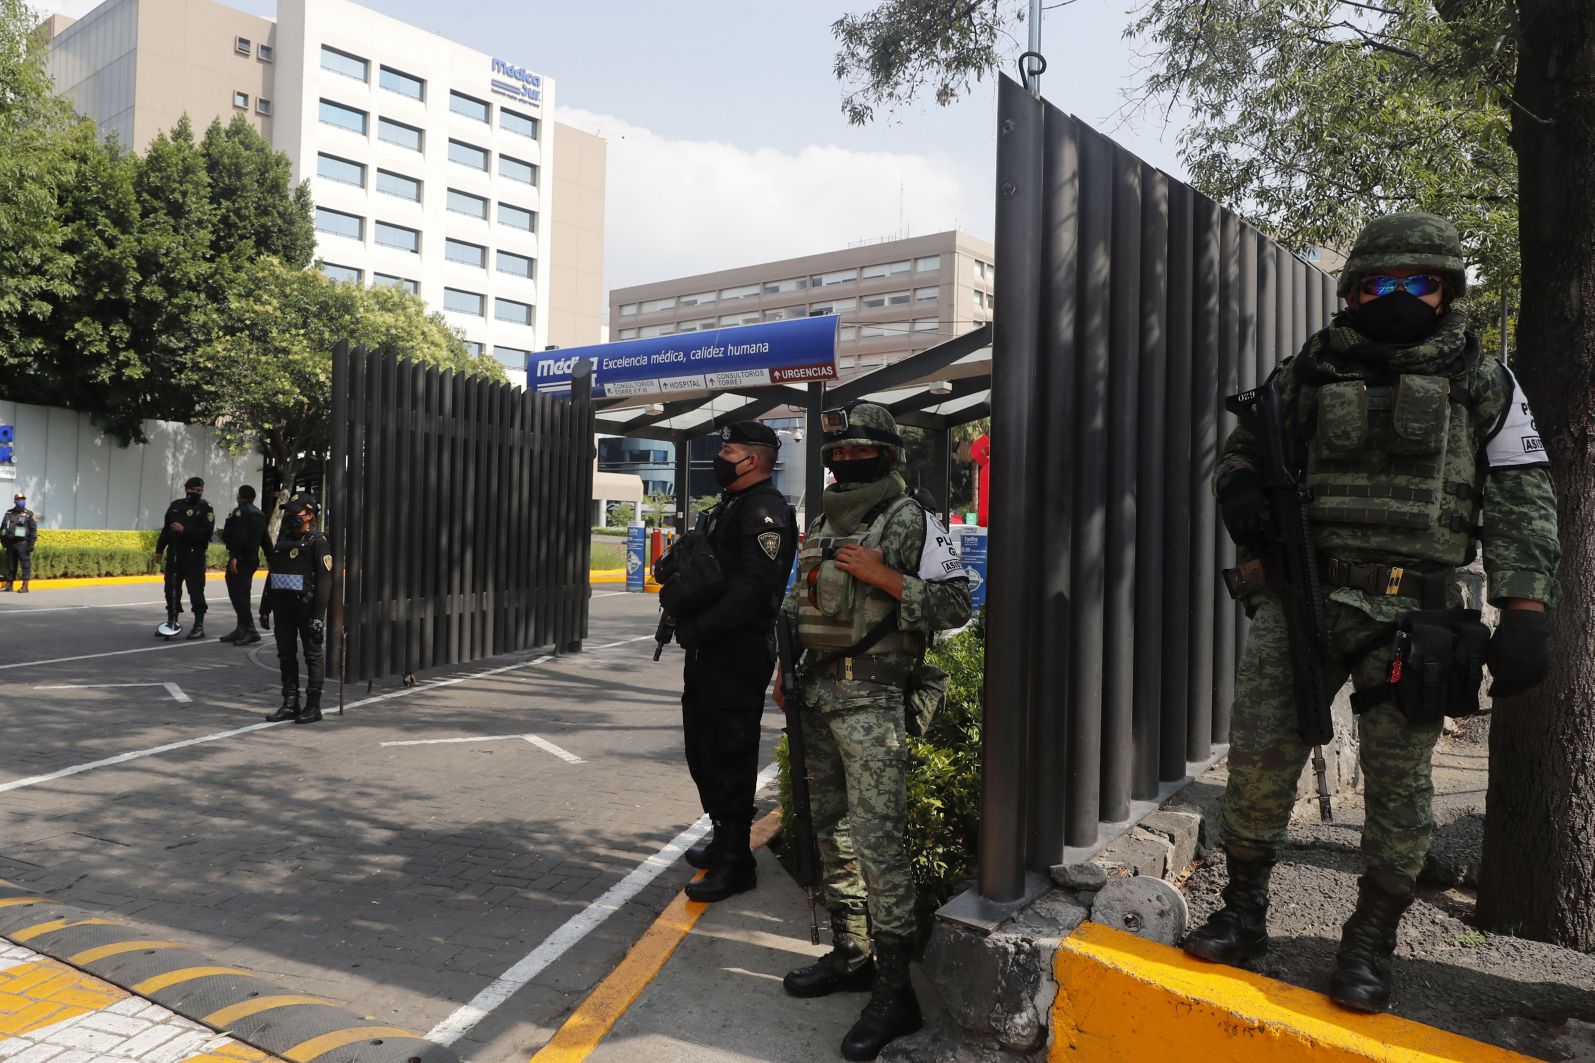 Mexican military troops and police officers guard the Médica Sur Hospital on 30 June 2020, where Mexico City's chief of police, Omar García Harfuch, was hospitalised after an assassination attempt by the Cártel de Jalisco Nueva Generación (CJNG). This was the most high-profile attack by the cartel, a sign of its increasing boldness in the face of the security forces. (Juan Carlos Williams/Eyepix Group/Barcroft Media via Getty Images)